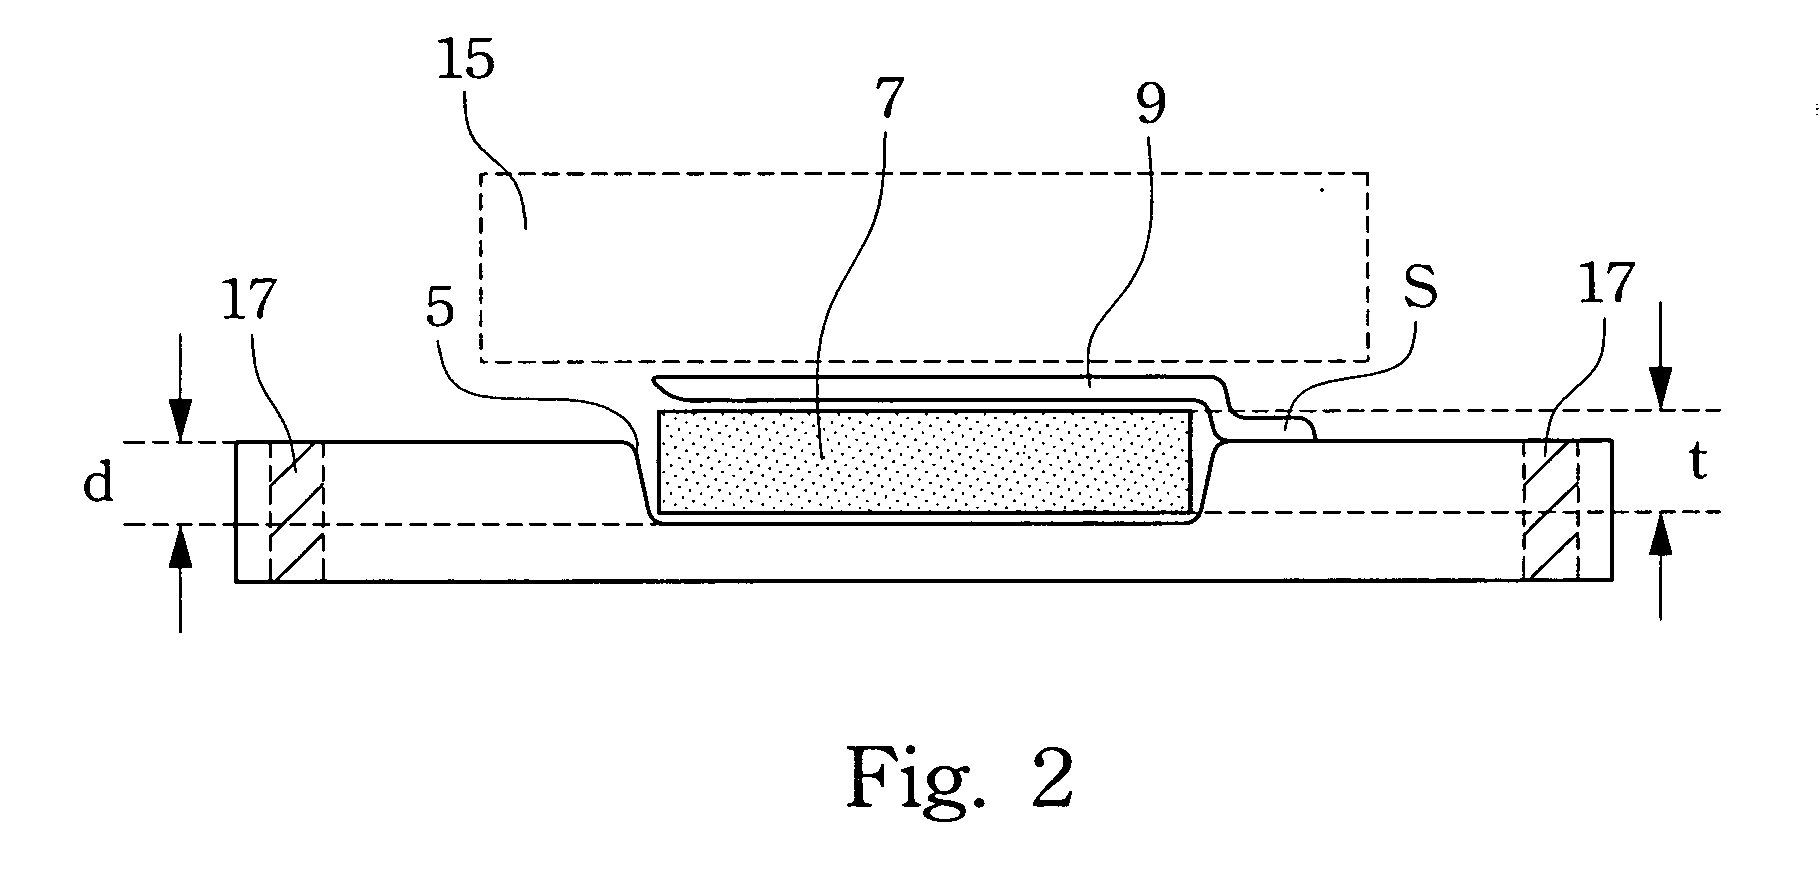 Apparatus for minimizing electromagnetic interferences